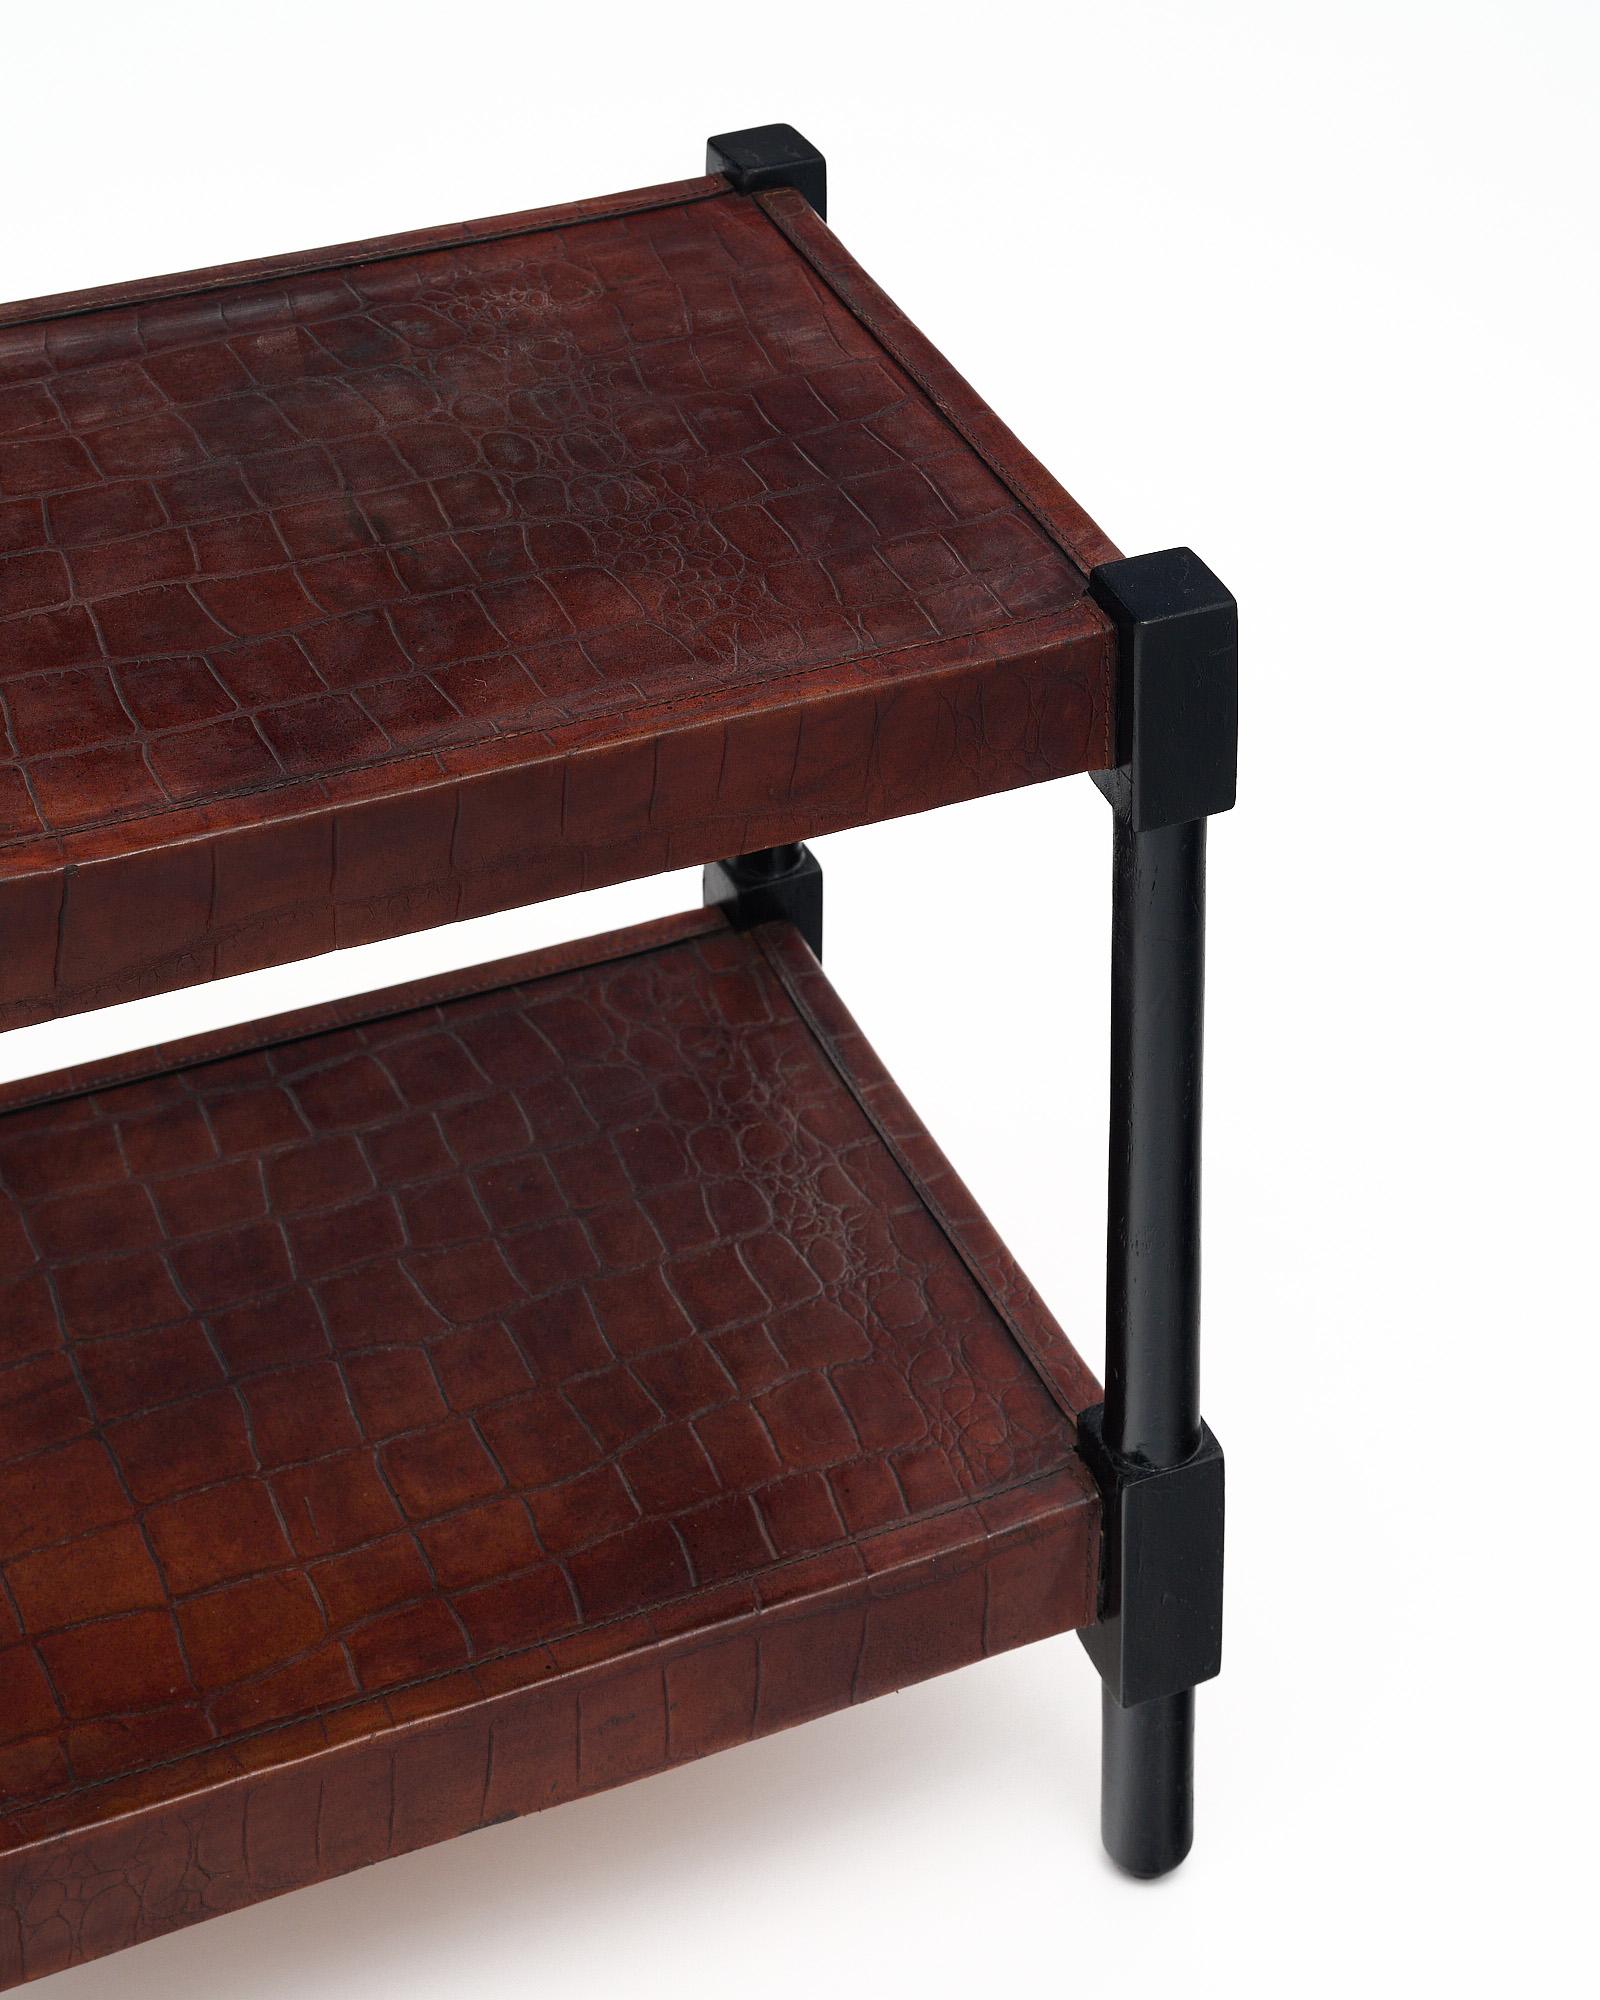 Vintage side table from Spain made with a wood structure and covered in a brown leather veneer with a snakeskin texture. This piece has ebonized legs and a lower shelf for functionality. It is by Spanish designer Valenti.